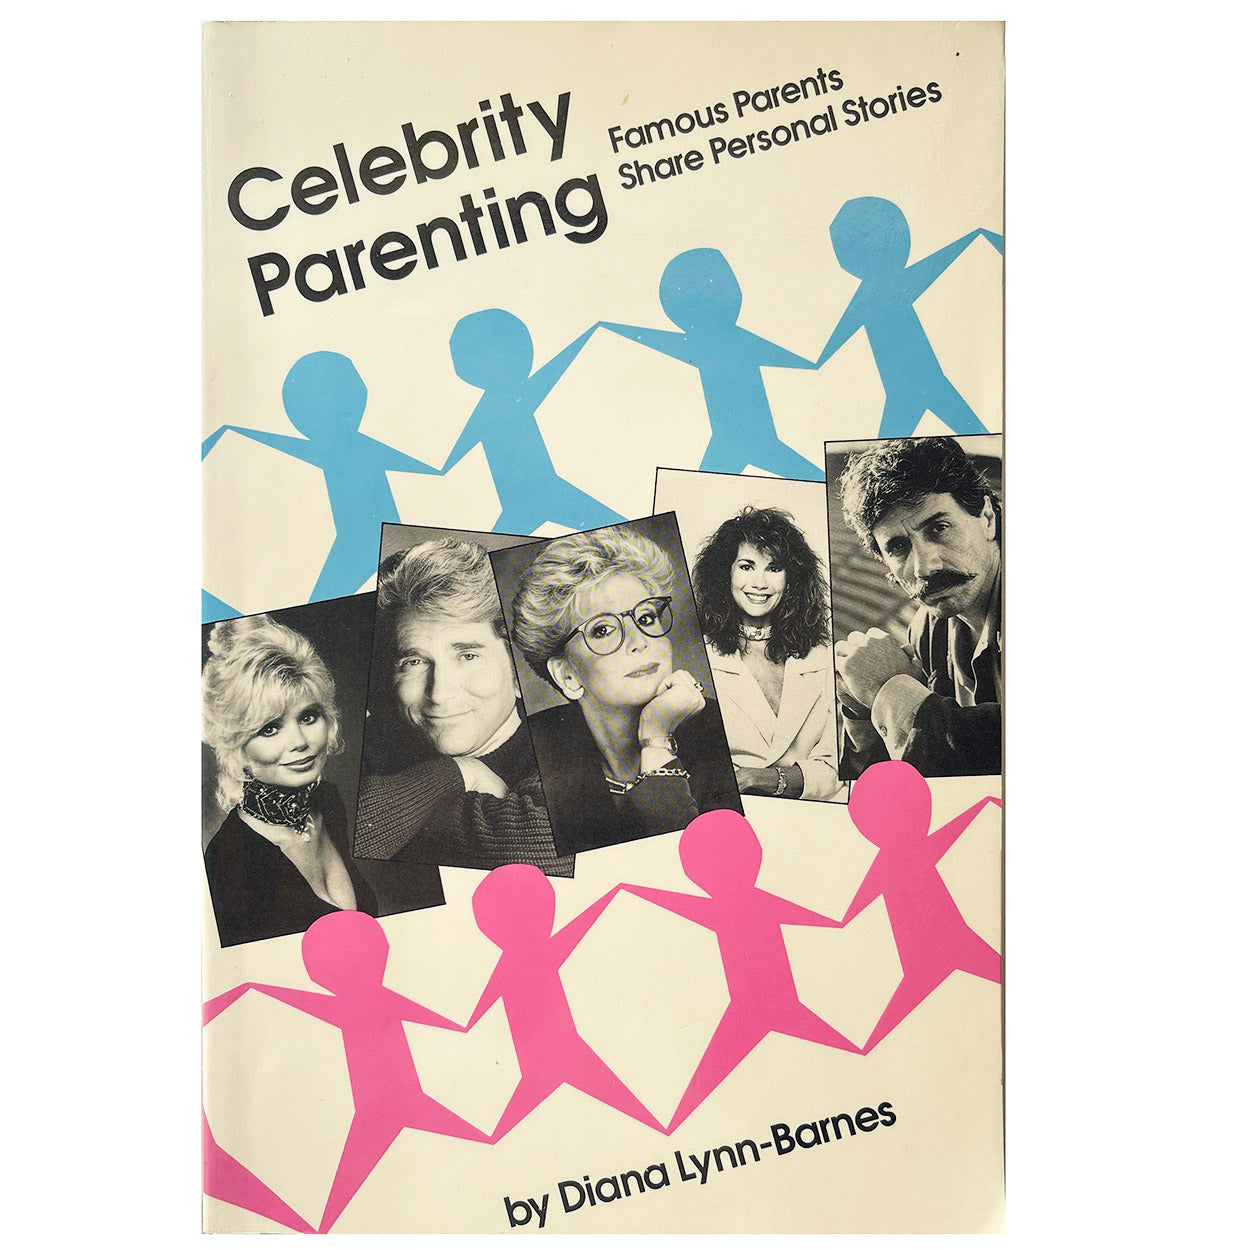 Celebrity Parenting : Famous Parents Share Personal Stories by Diana Lynn-Barnes